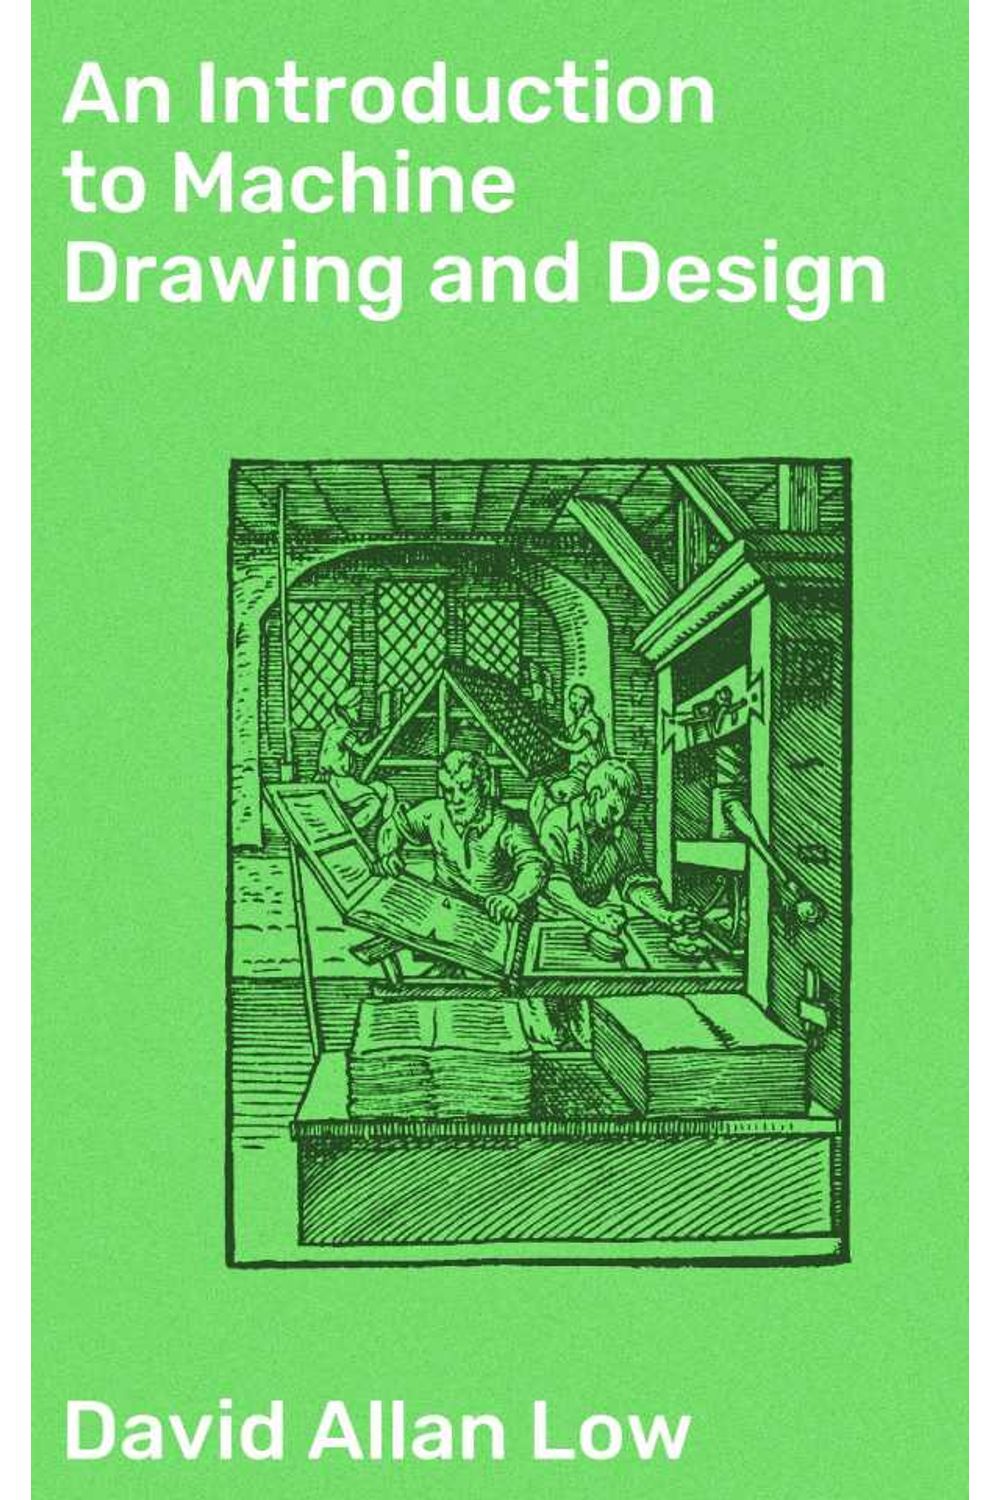 bw-an-introduction-to-machine-drawing-and-design-good-press-4057664594303